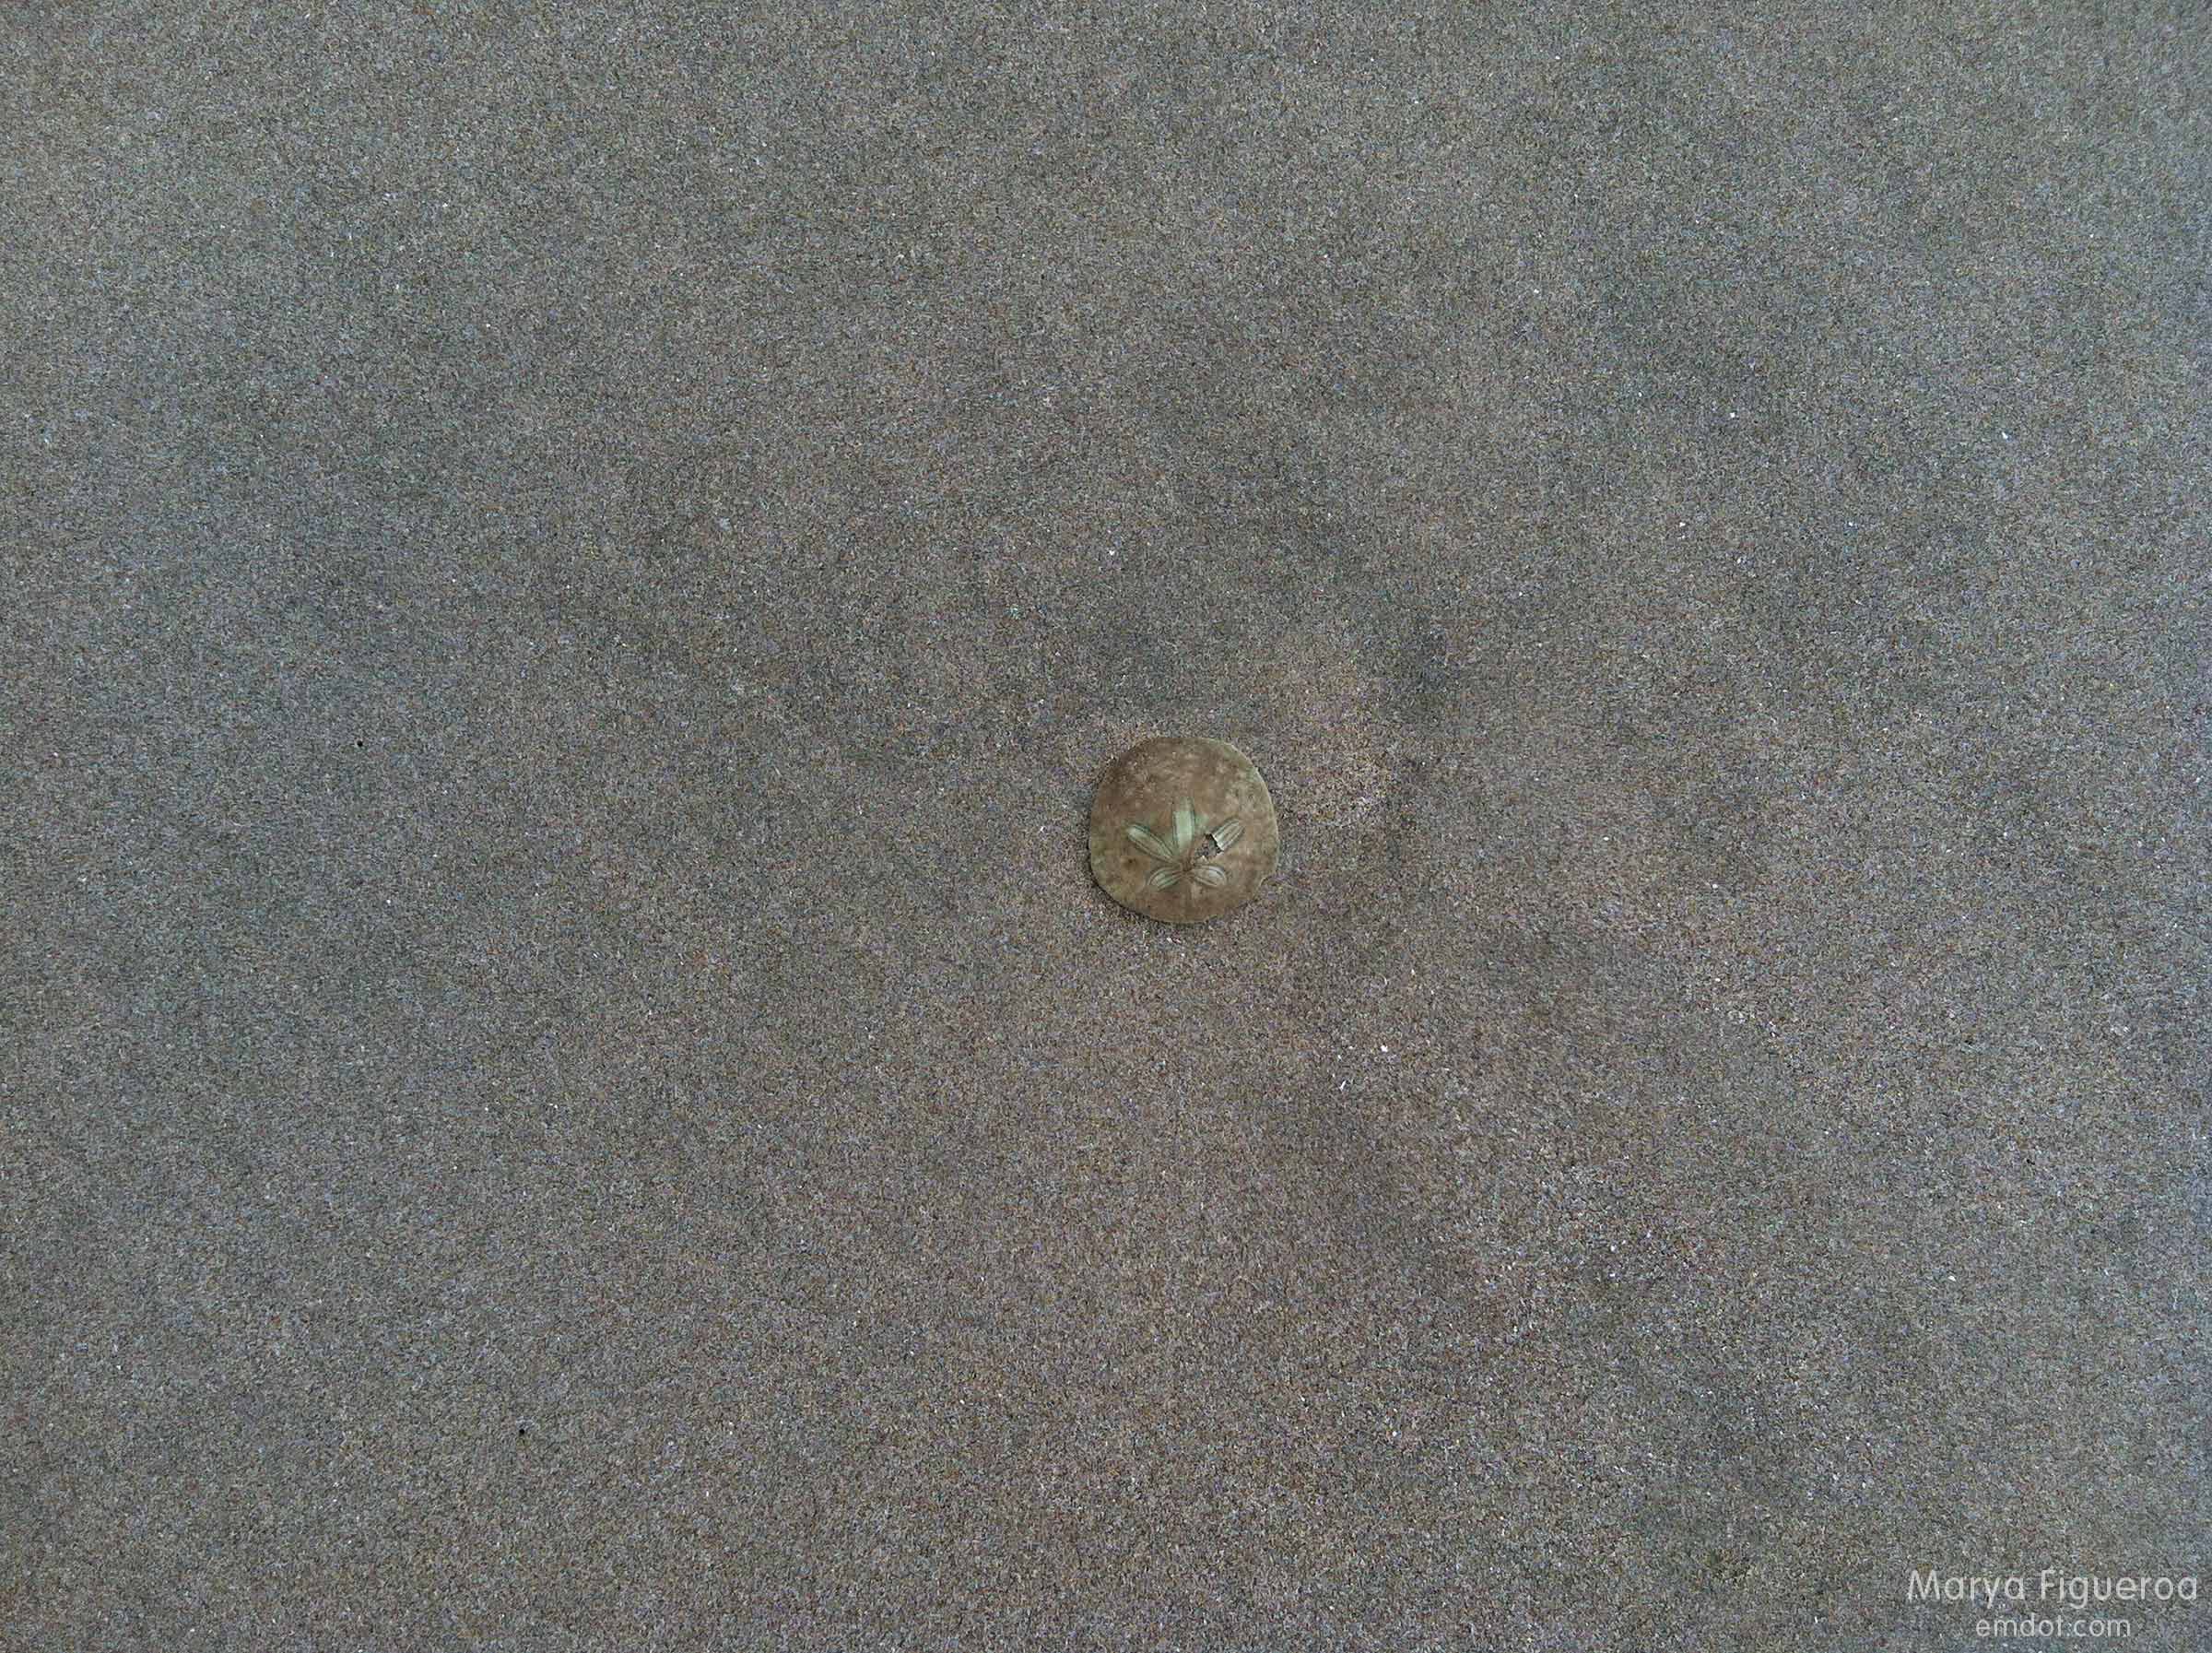 sand dollar that blends in with the sand